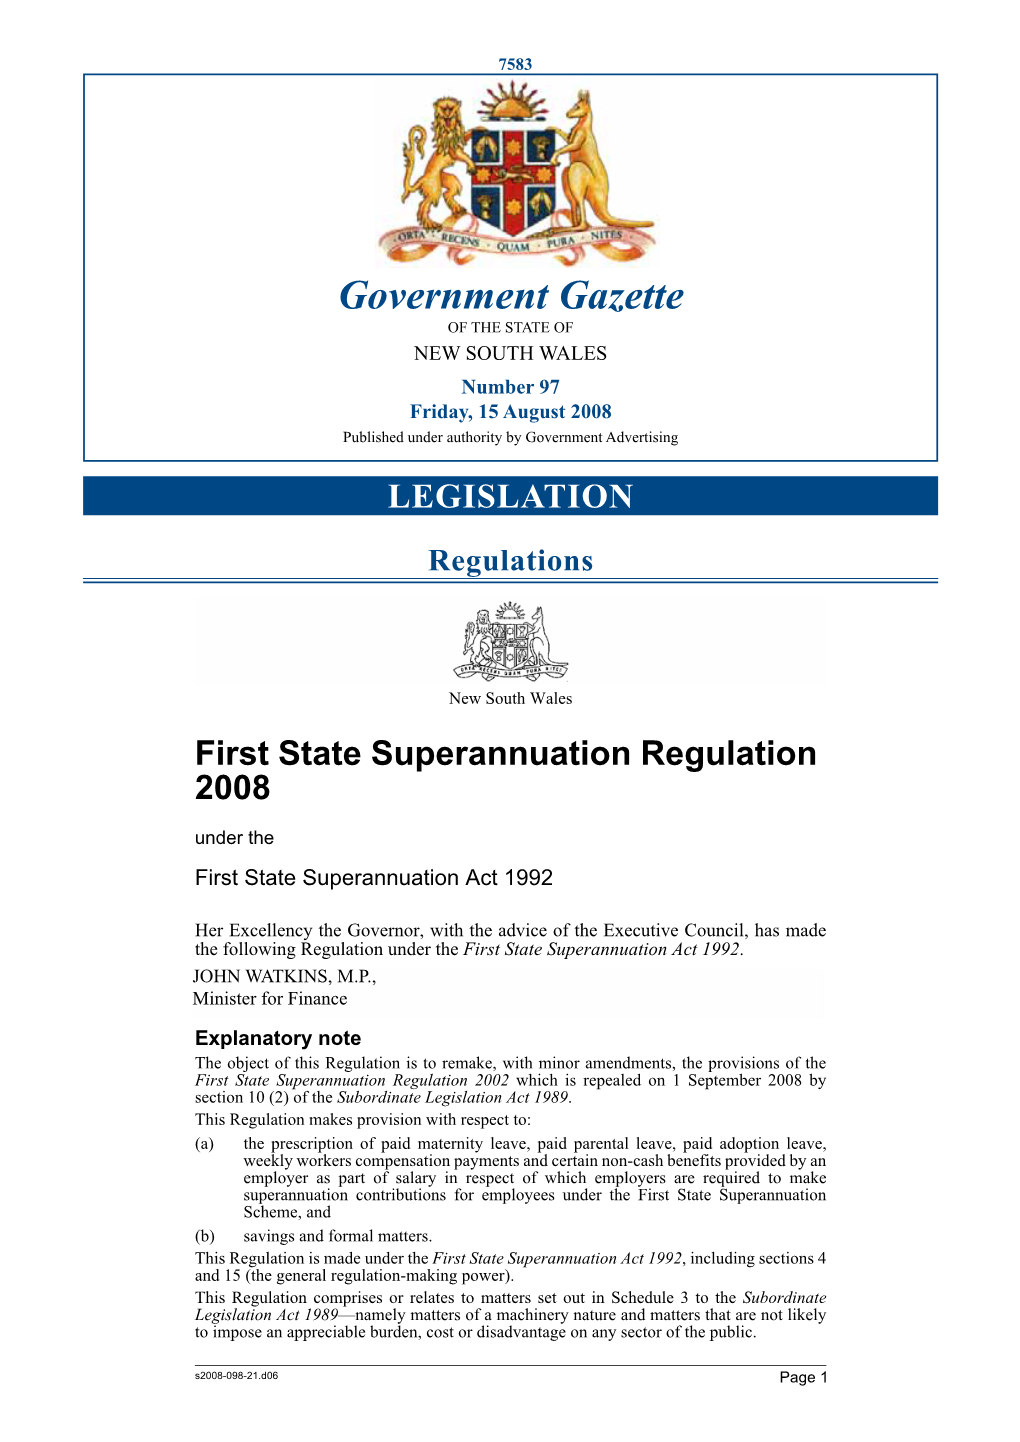 Government Gazette of the STATE of NEW SOUTH WALES Number 97 Friday, 15 August 2008 Published Under Authority by Government Advertising